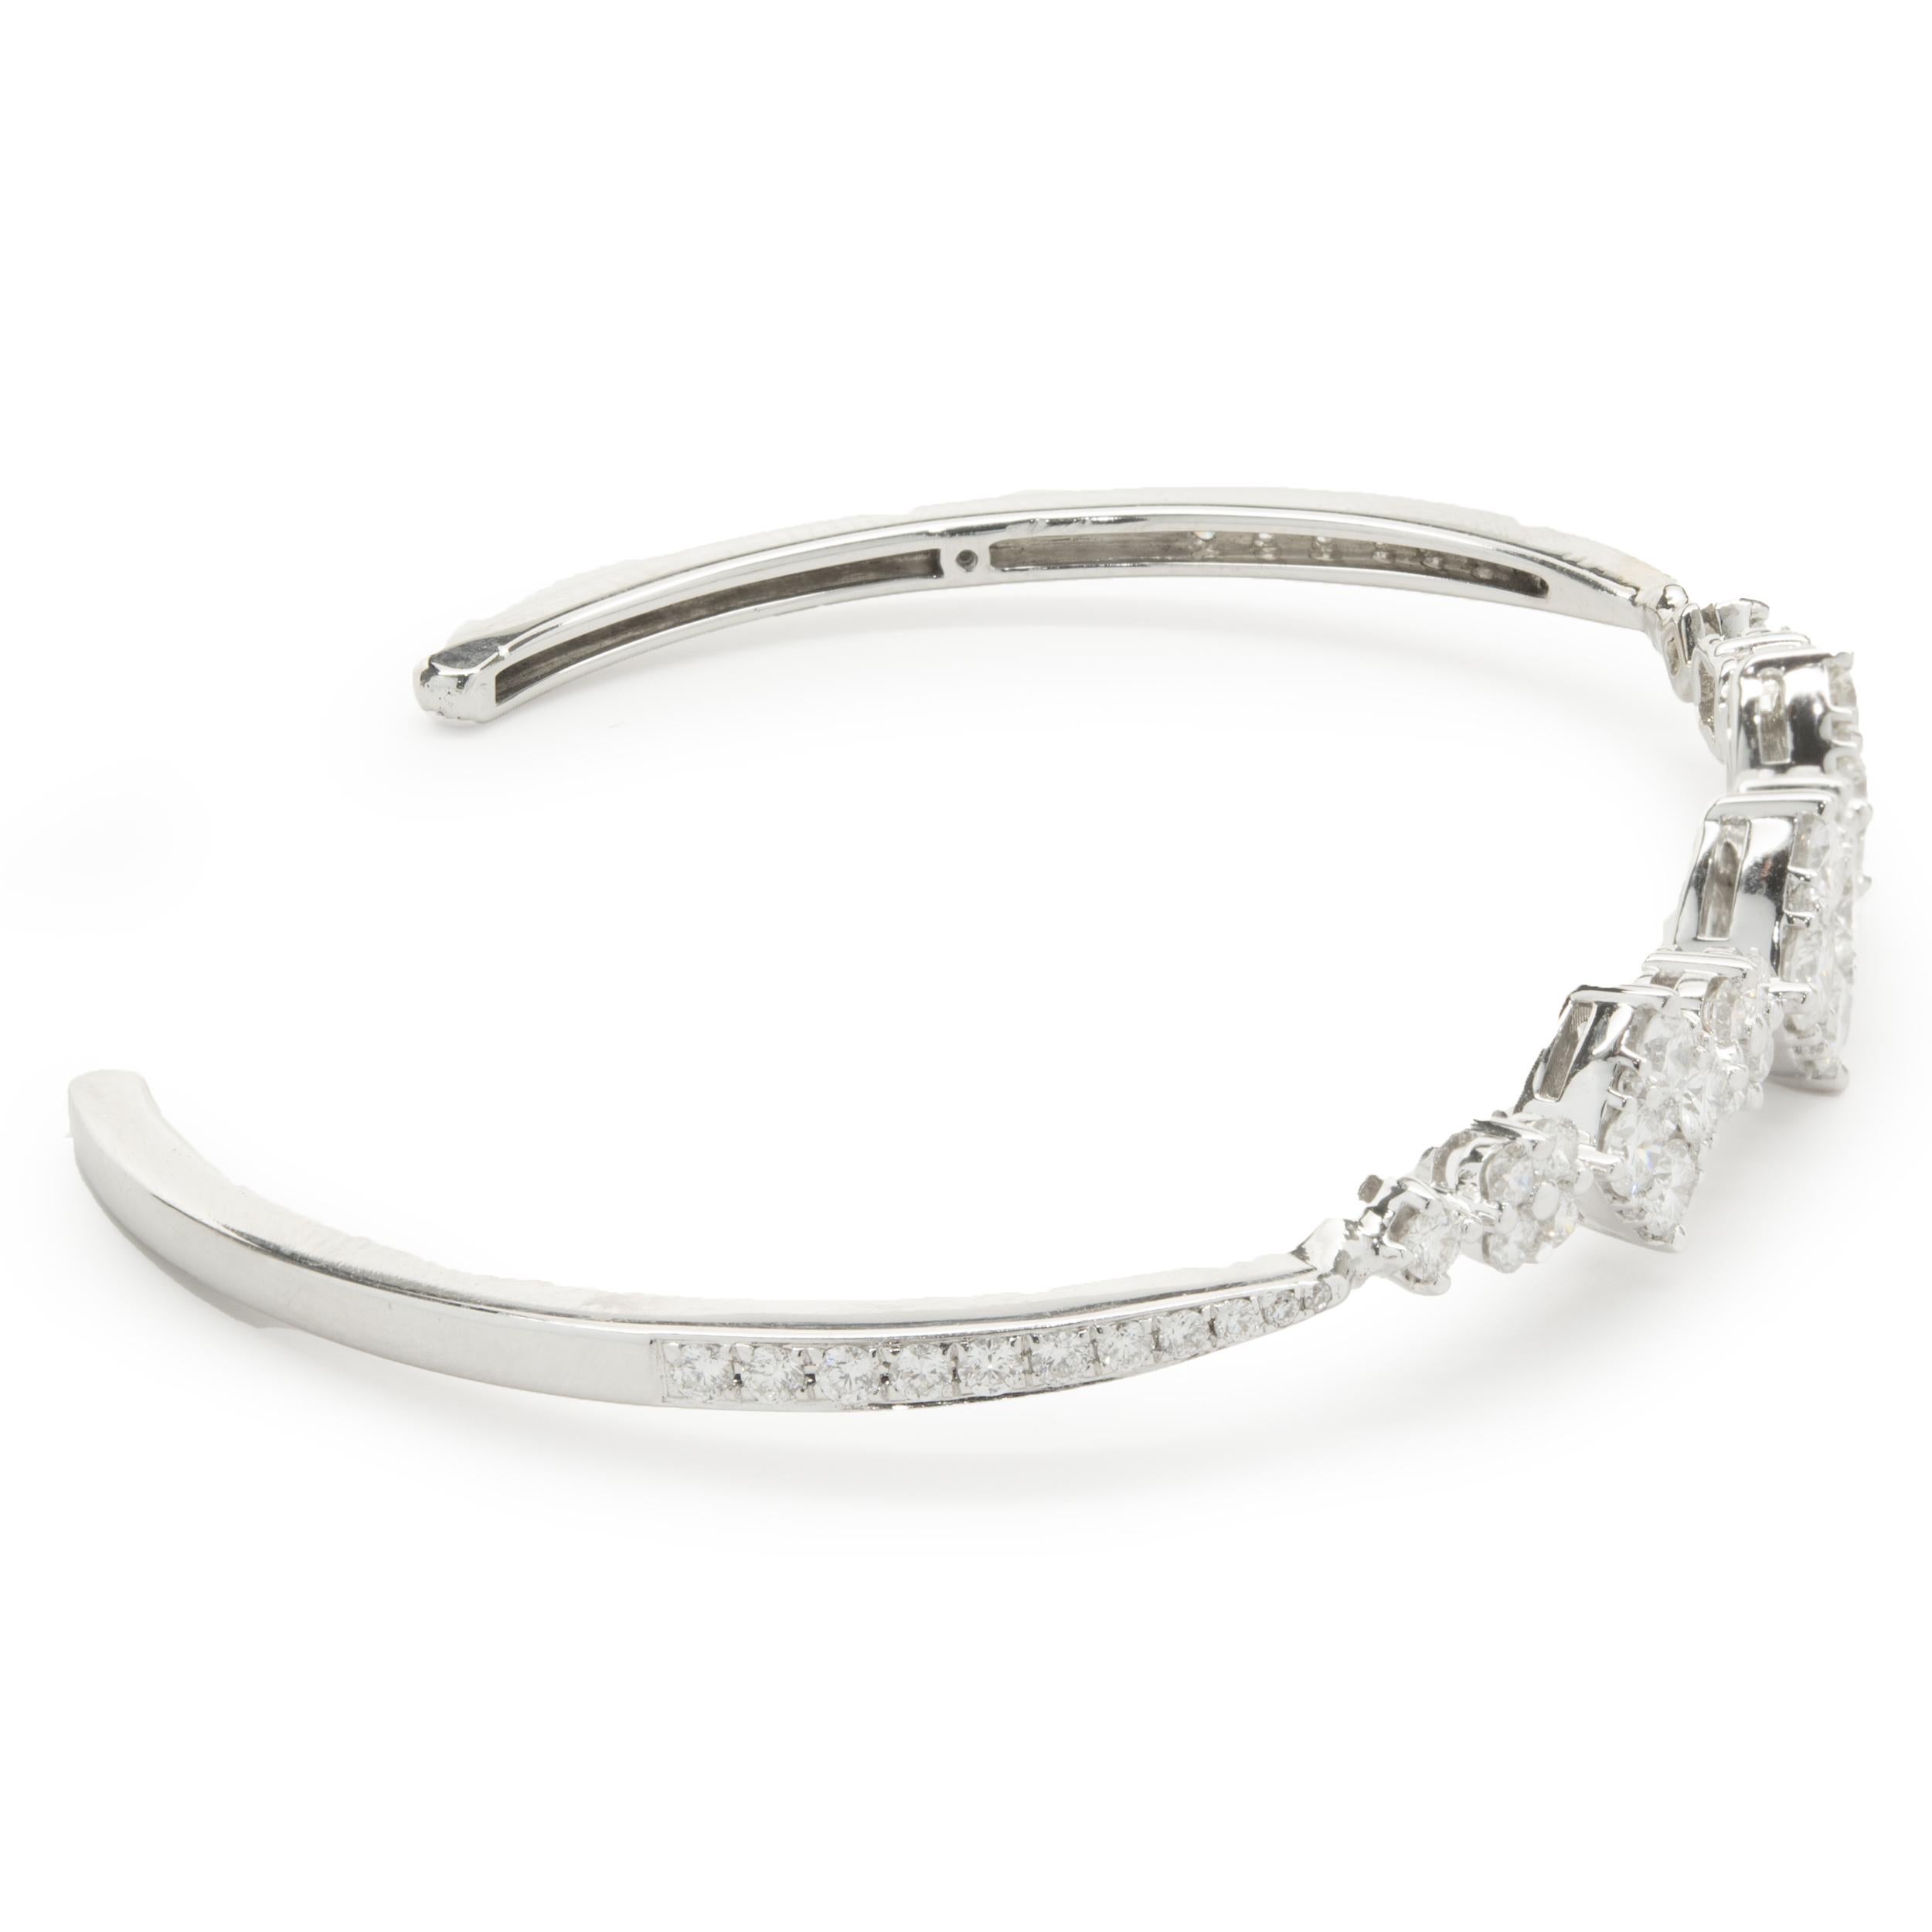 Designer: custom 
Material: 18K white gold
Diamond: 67 round brilliant cut = 2.51cttw
Color:  F / G
Clarity: VS2
Dimensions: bracelet will fit up to a 6-inch wrist
Weight: 10.24 grams
